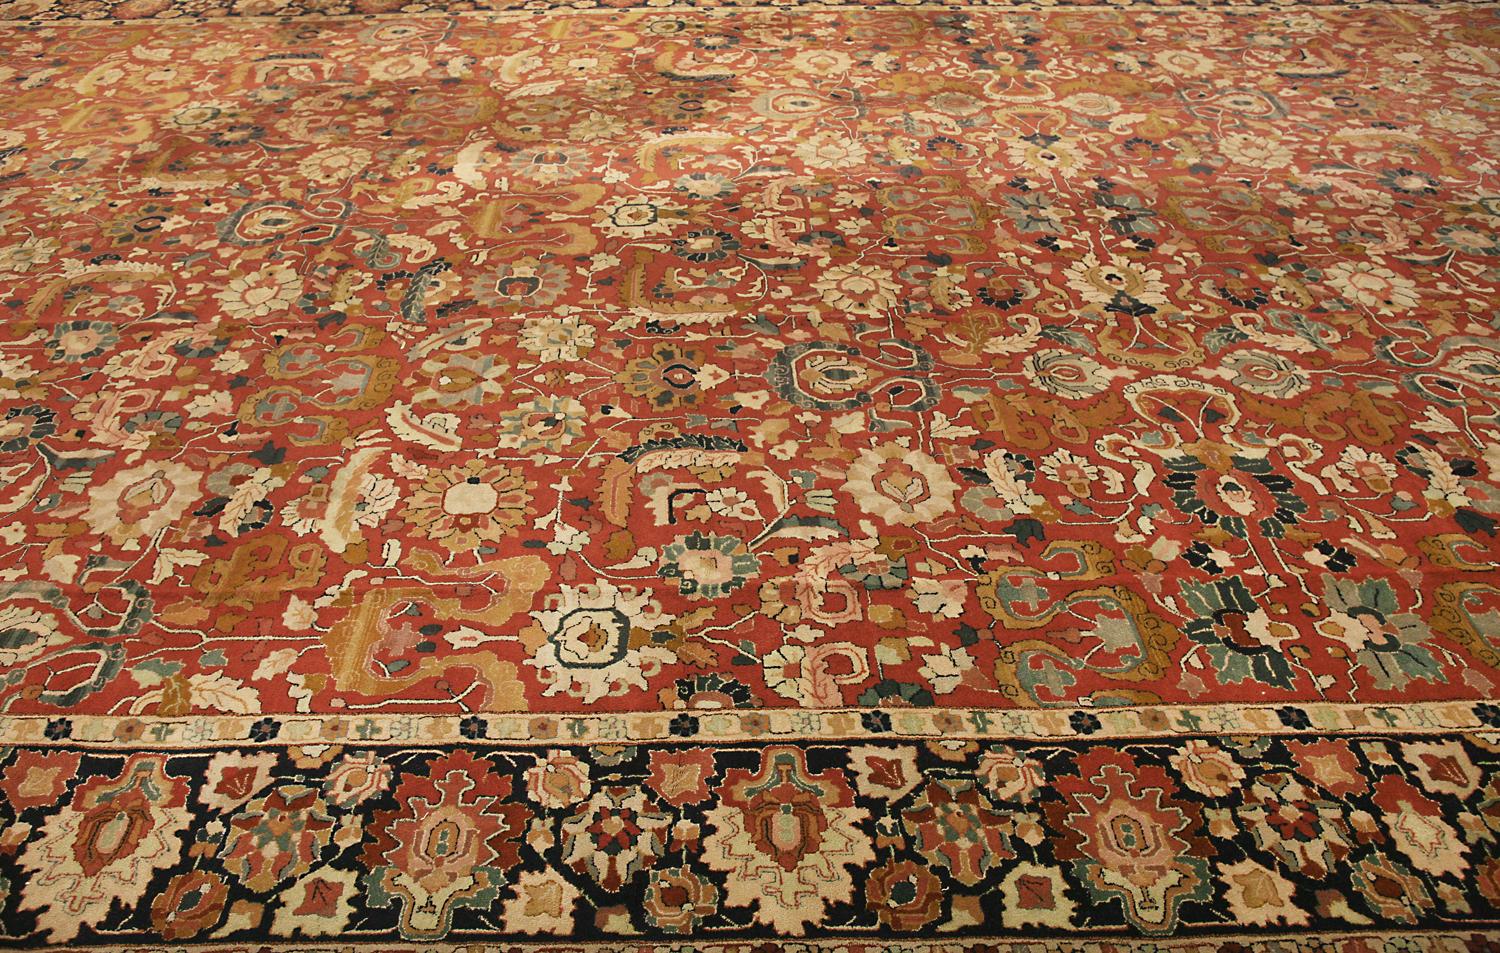 This is a massive antique German Tetex carpet woven circa the 1920s and measures 795 x 395cm in size. The design of this rug takes inspiration from 17th-century Persian vase carpets woven during the Safavid empire. Its border also incorporates a